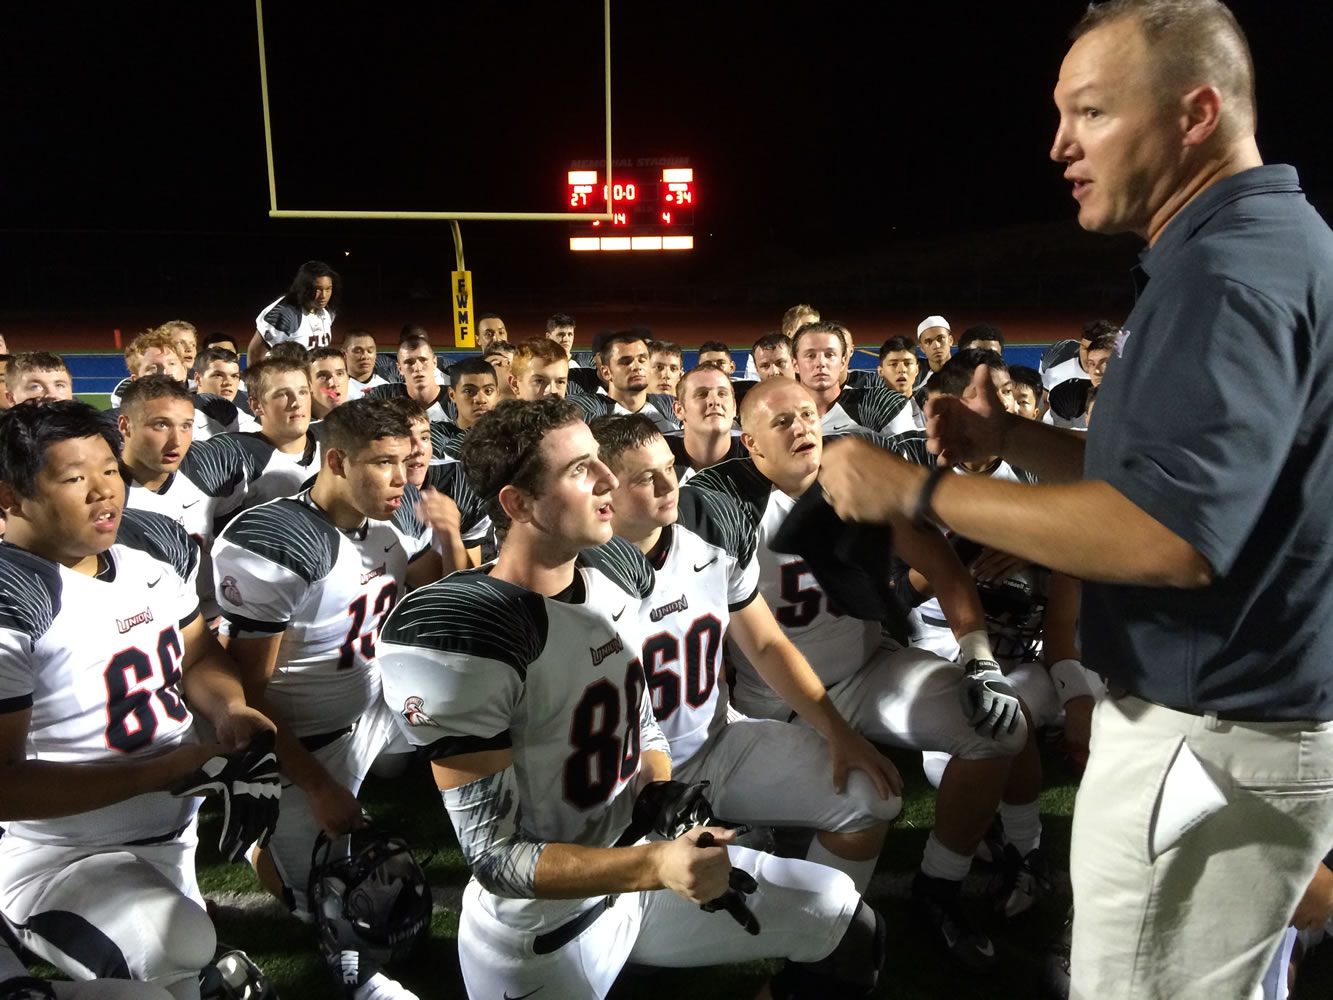 Coach Gary McGarvie talks to his players after Union beat Federal Way 34-27 in his debut as Union's head coach on Saturday.